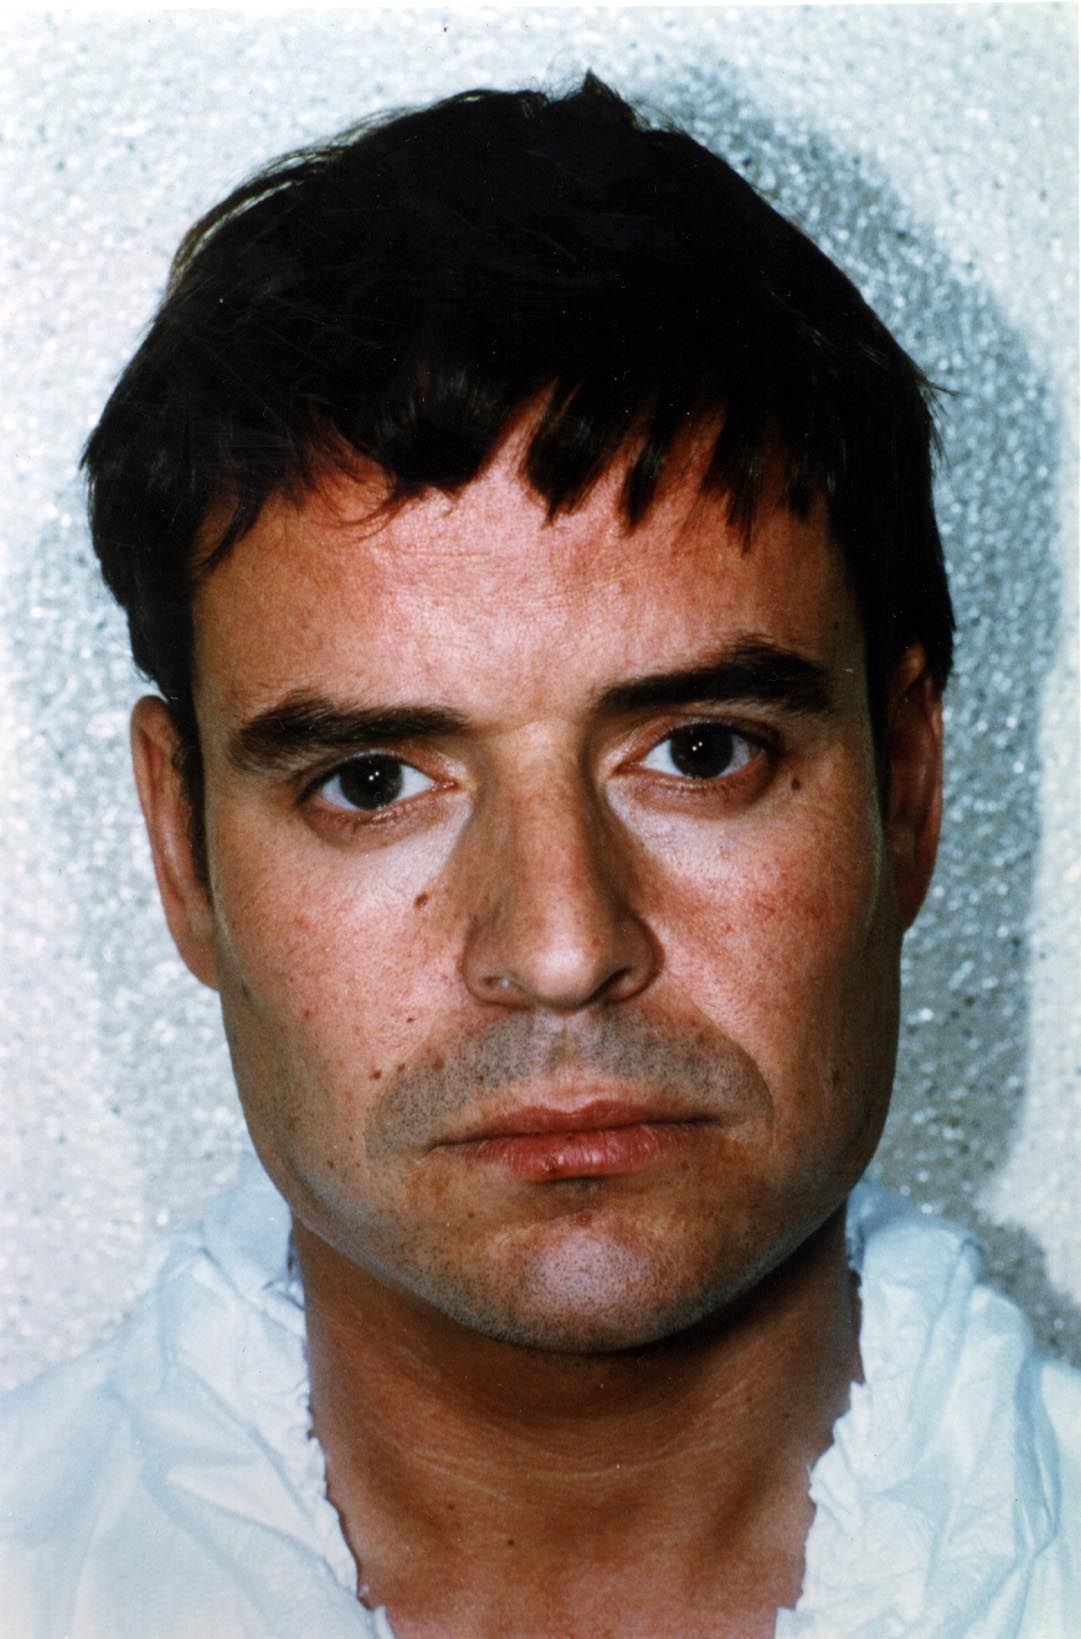 Richard Baker from Cornwall was jailed in 1999 for a string of rapes and other sex crimes Picutre: PA Archive/PA Images